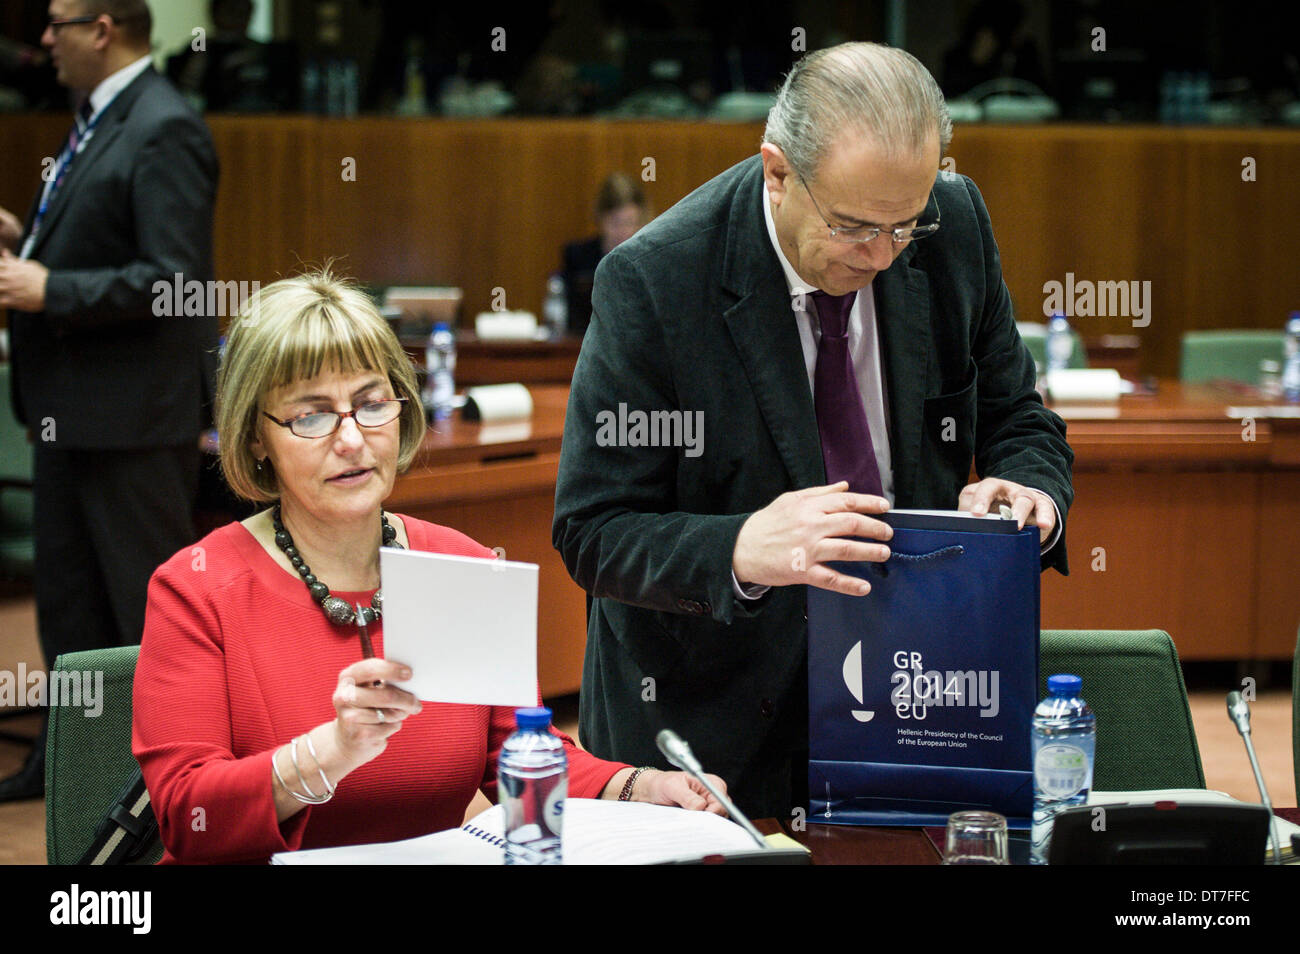 Croatian vice prime minister Vesna Pusic (L) and Cypriot Foreign Minister Ioannis Kasoulides during General Affair Council European Affairs ministers meeting at European Council headquarters in Brussels, Belgium on 11.02.2014 Ministers take a decision on the authorisation of the placing of the market for cultivation purposes of the genetically modified maize 1507. The Council established also an EU military operation to contribute to a secure environment in the Central African Republic, as authorised by the UN Security Council in resolution 2134. by Wiktor Dabkowski Stock Photo